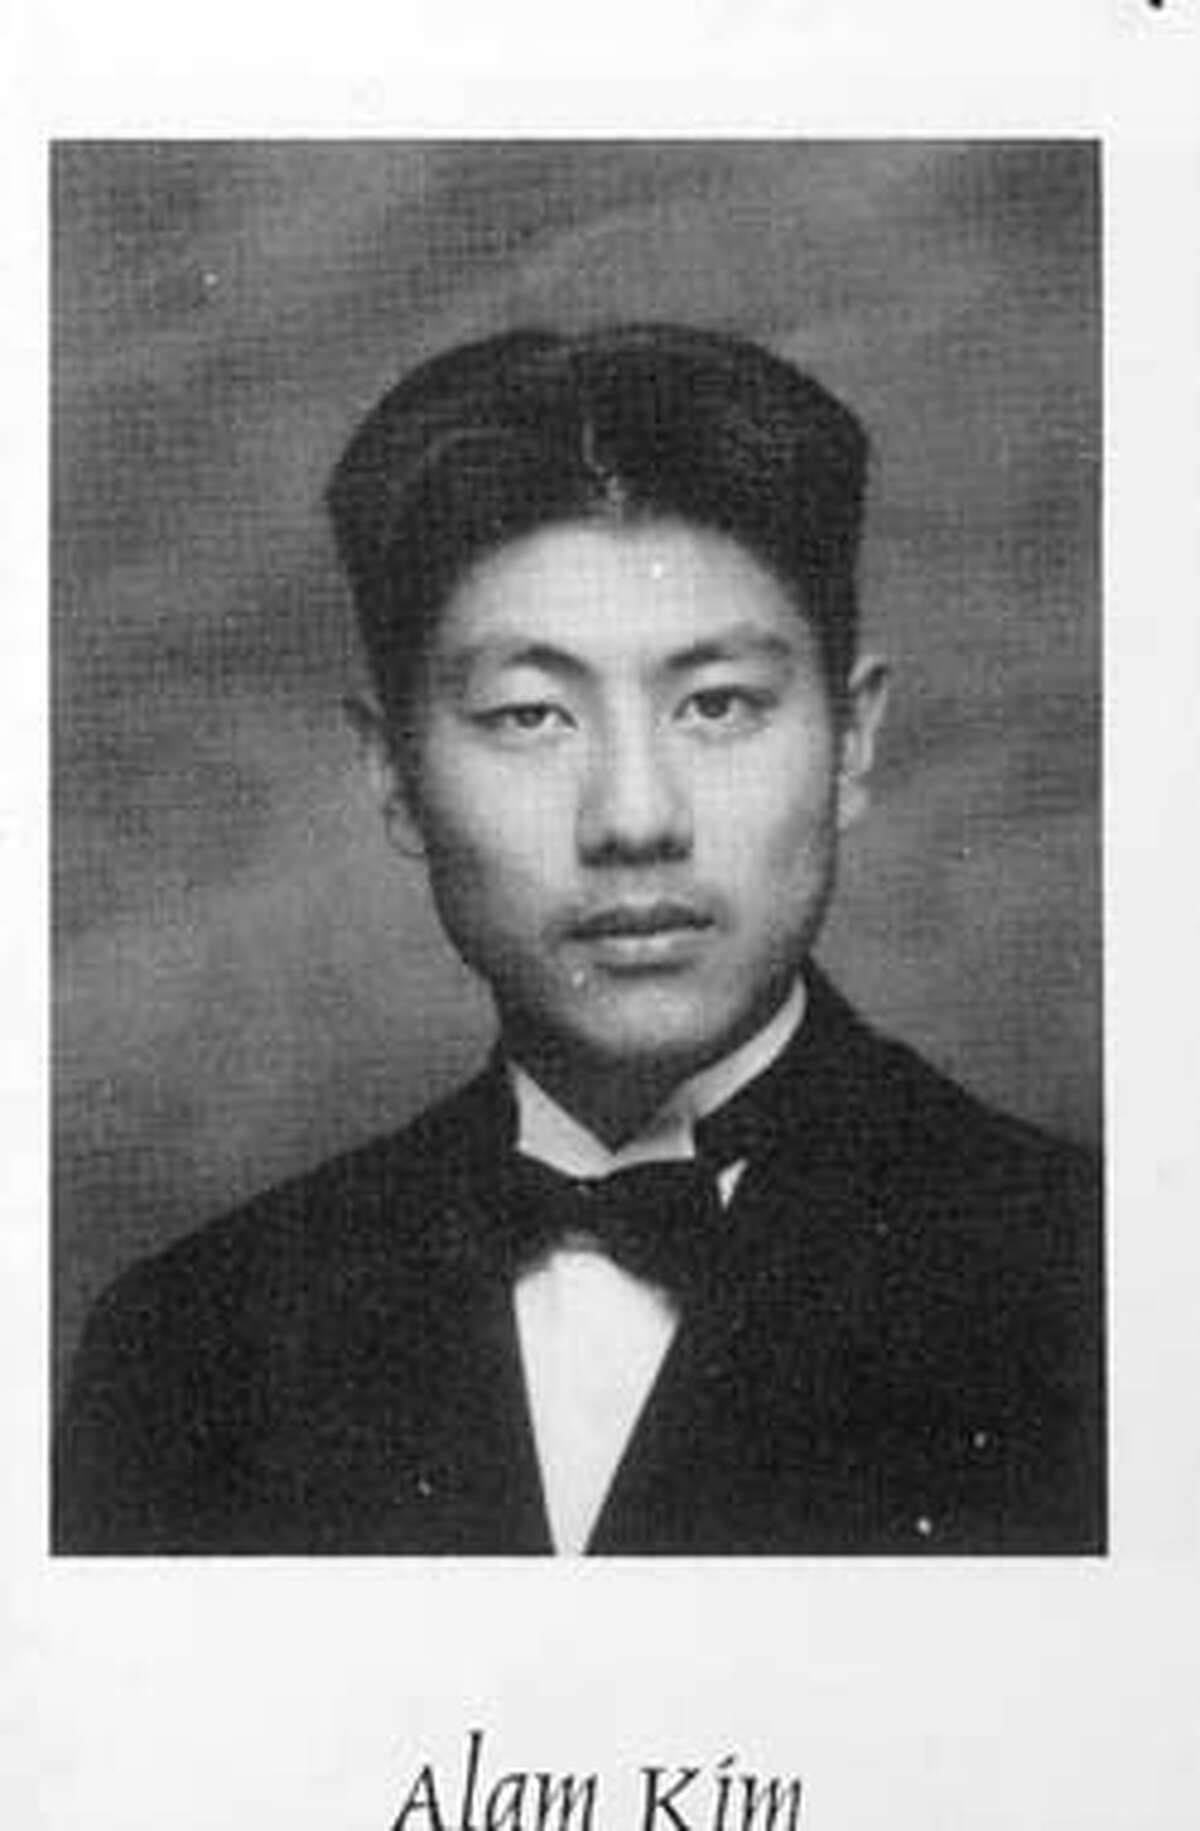 Alam Kim graduation photo from Lowell High School 1998 yearbook.